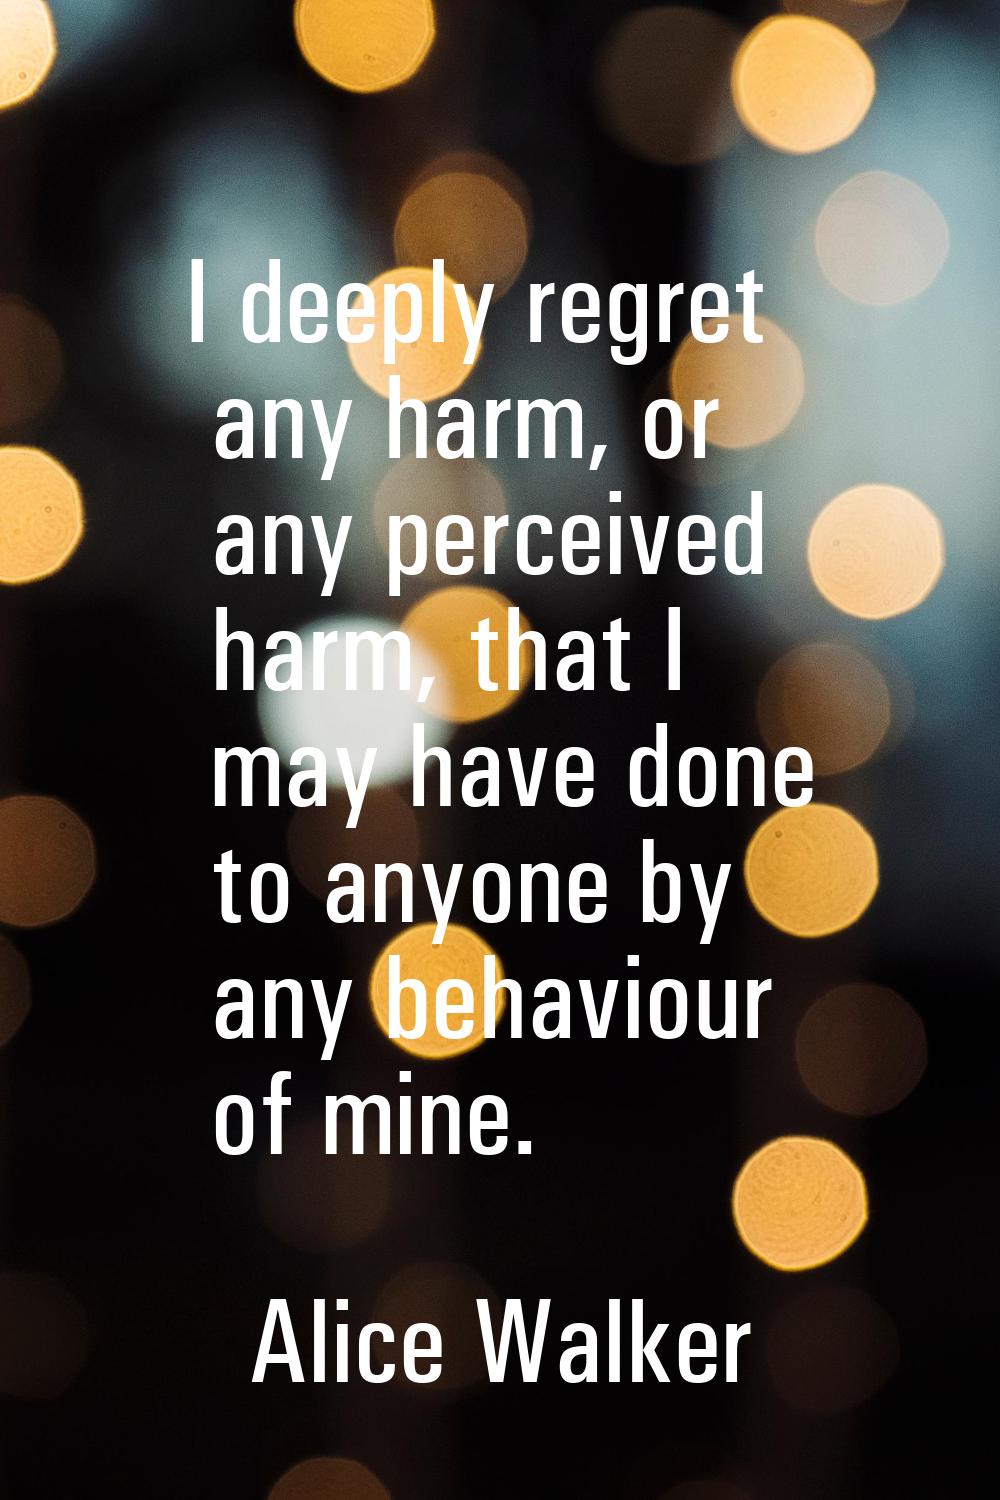 I deeply regret any harm, or any perceived harm, that I may have done to anyone by any behaviour of